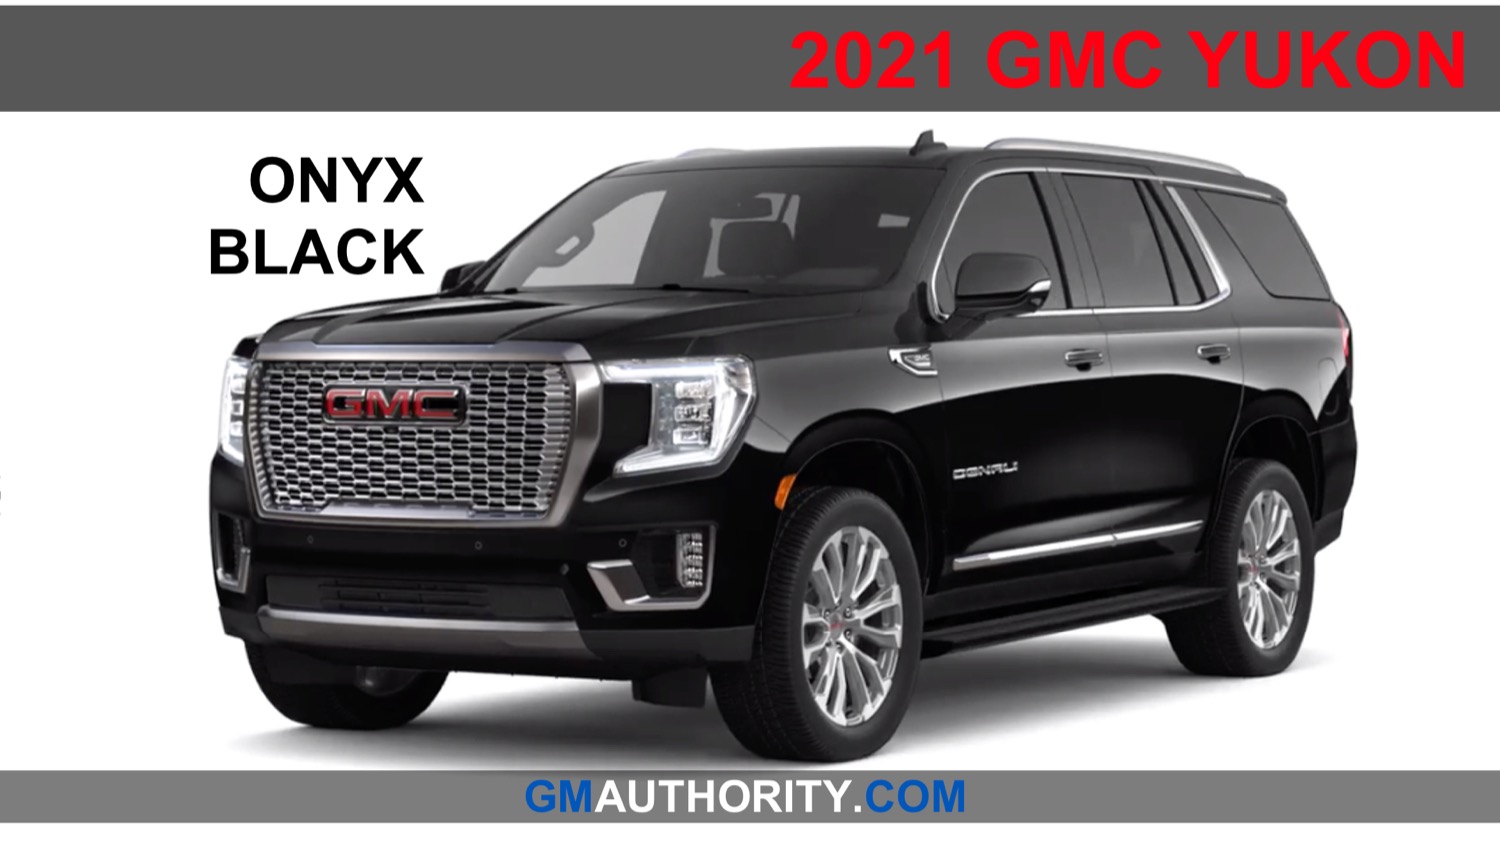 Here Are The Ten 2021 GMC Yukon Colors | GM Authority